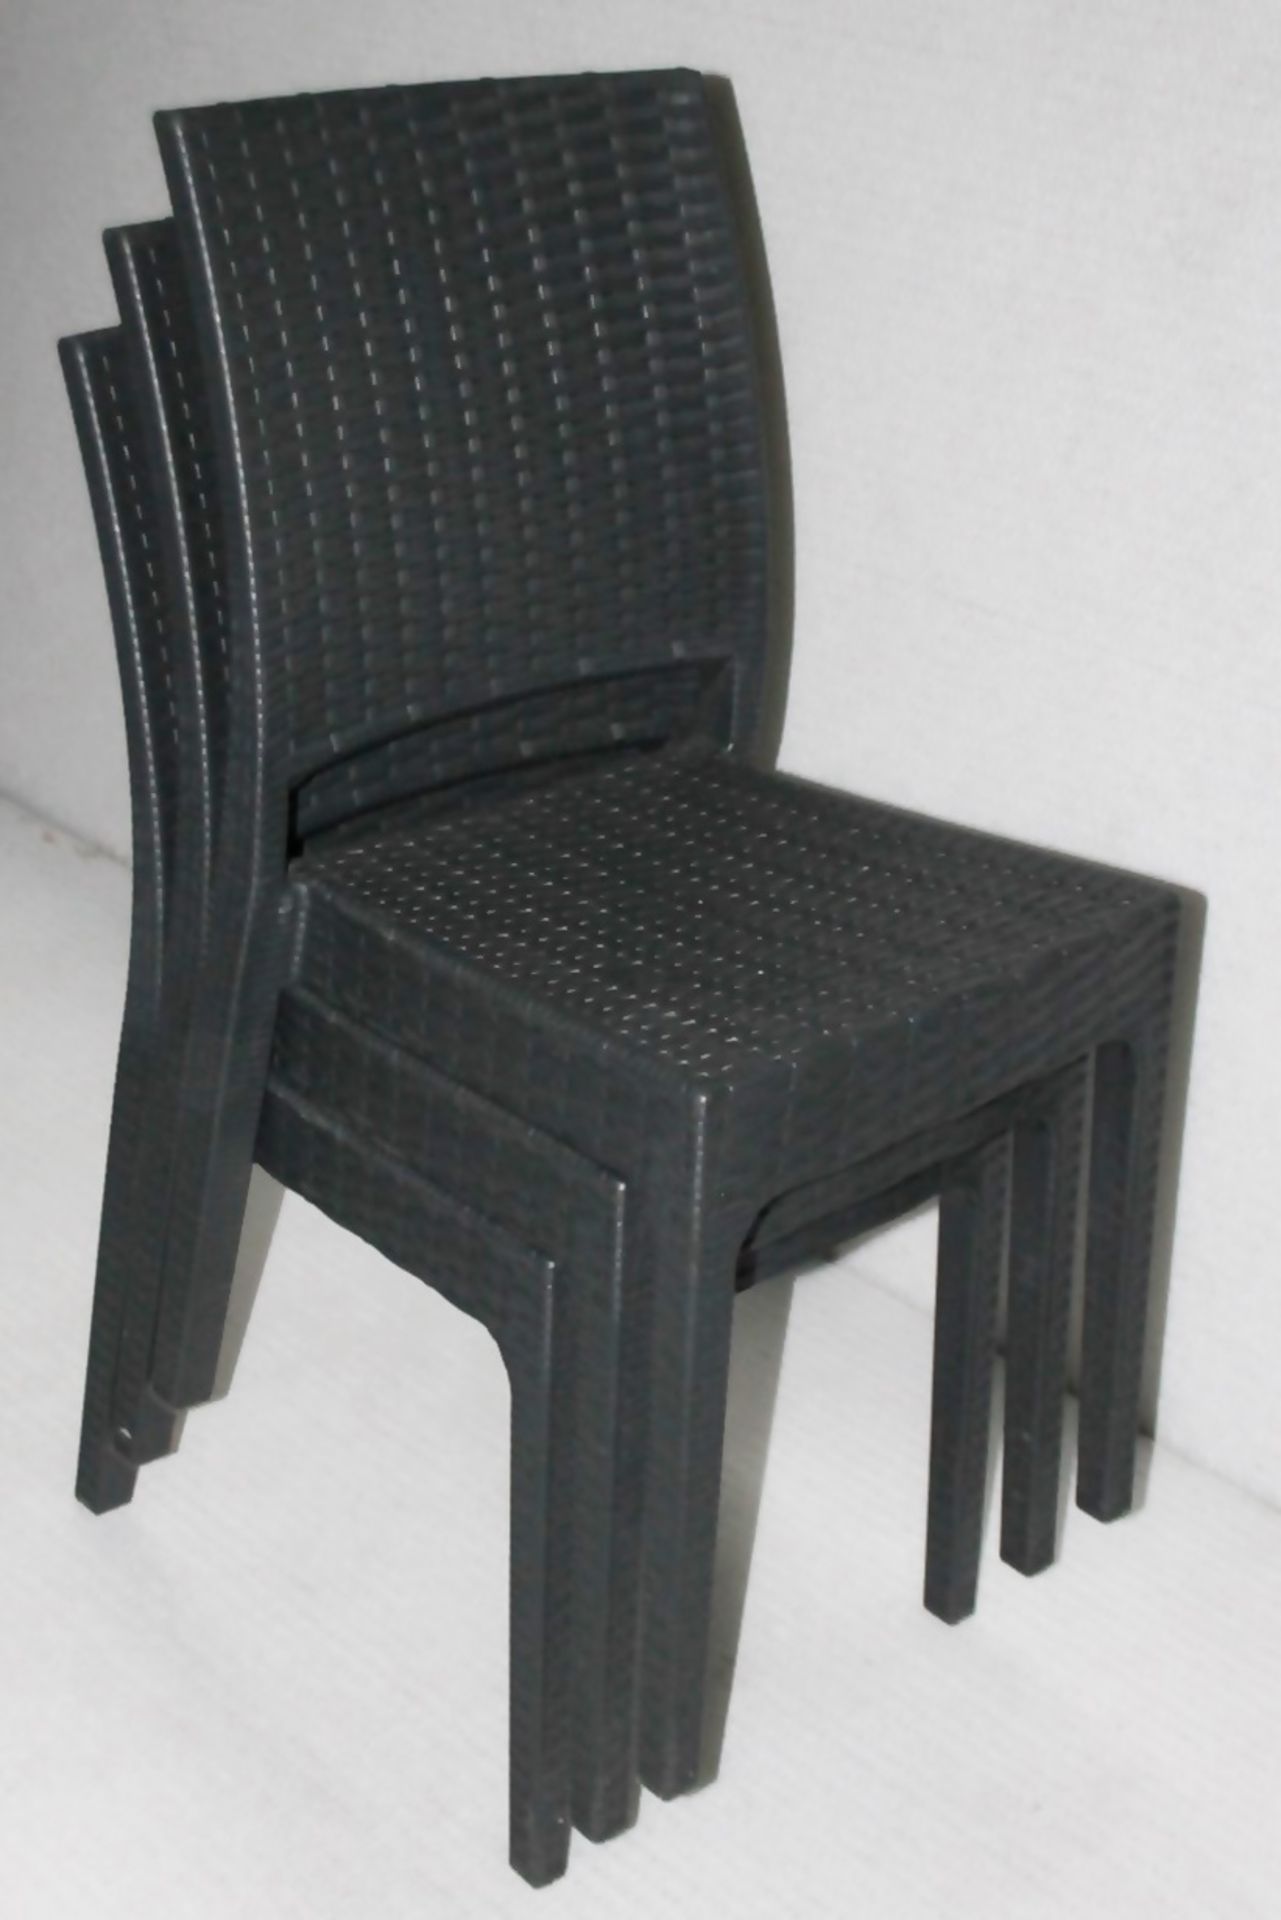 4 x SIESTA EXCLUSIVE 'Florida' Commercial Stackable Rattan-style Chairs In Dark Grey -CL987 - - Image 12 of 13